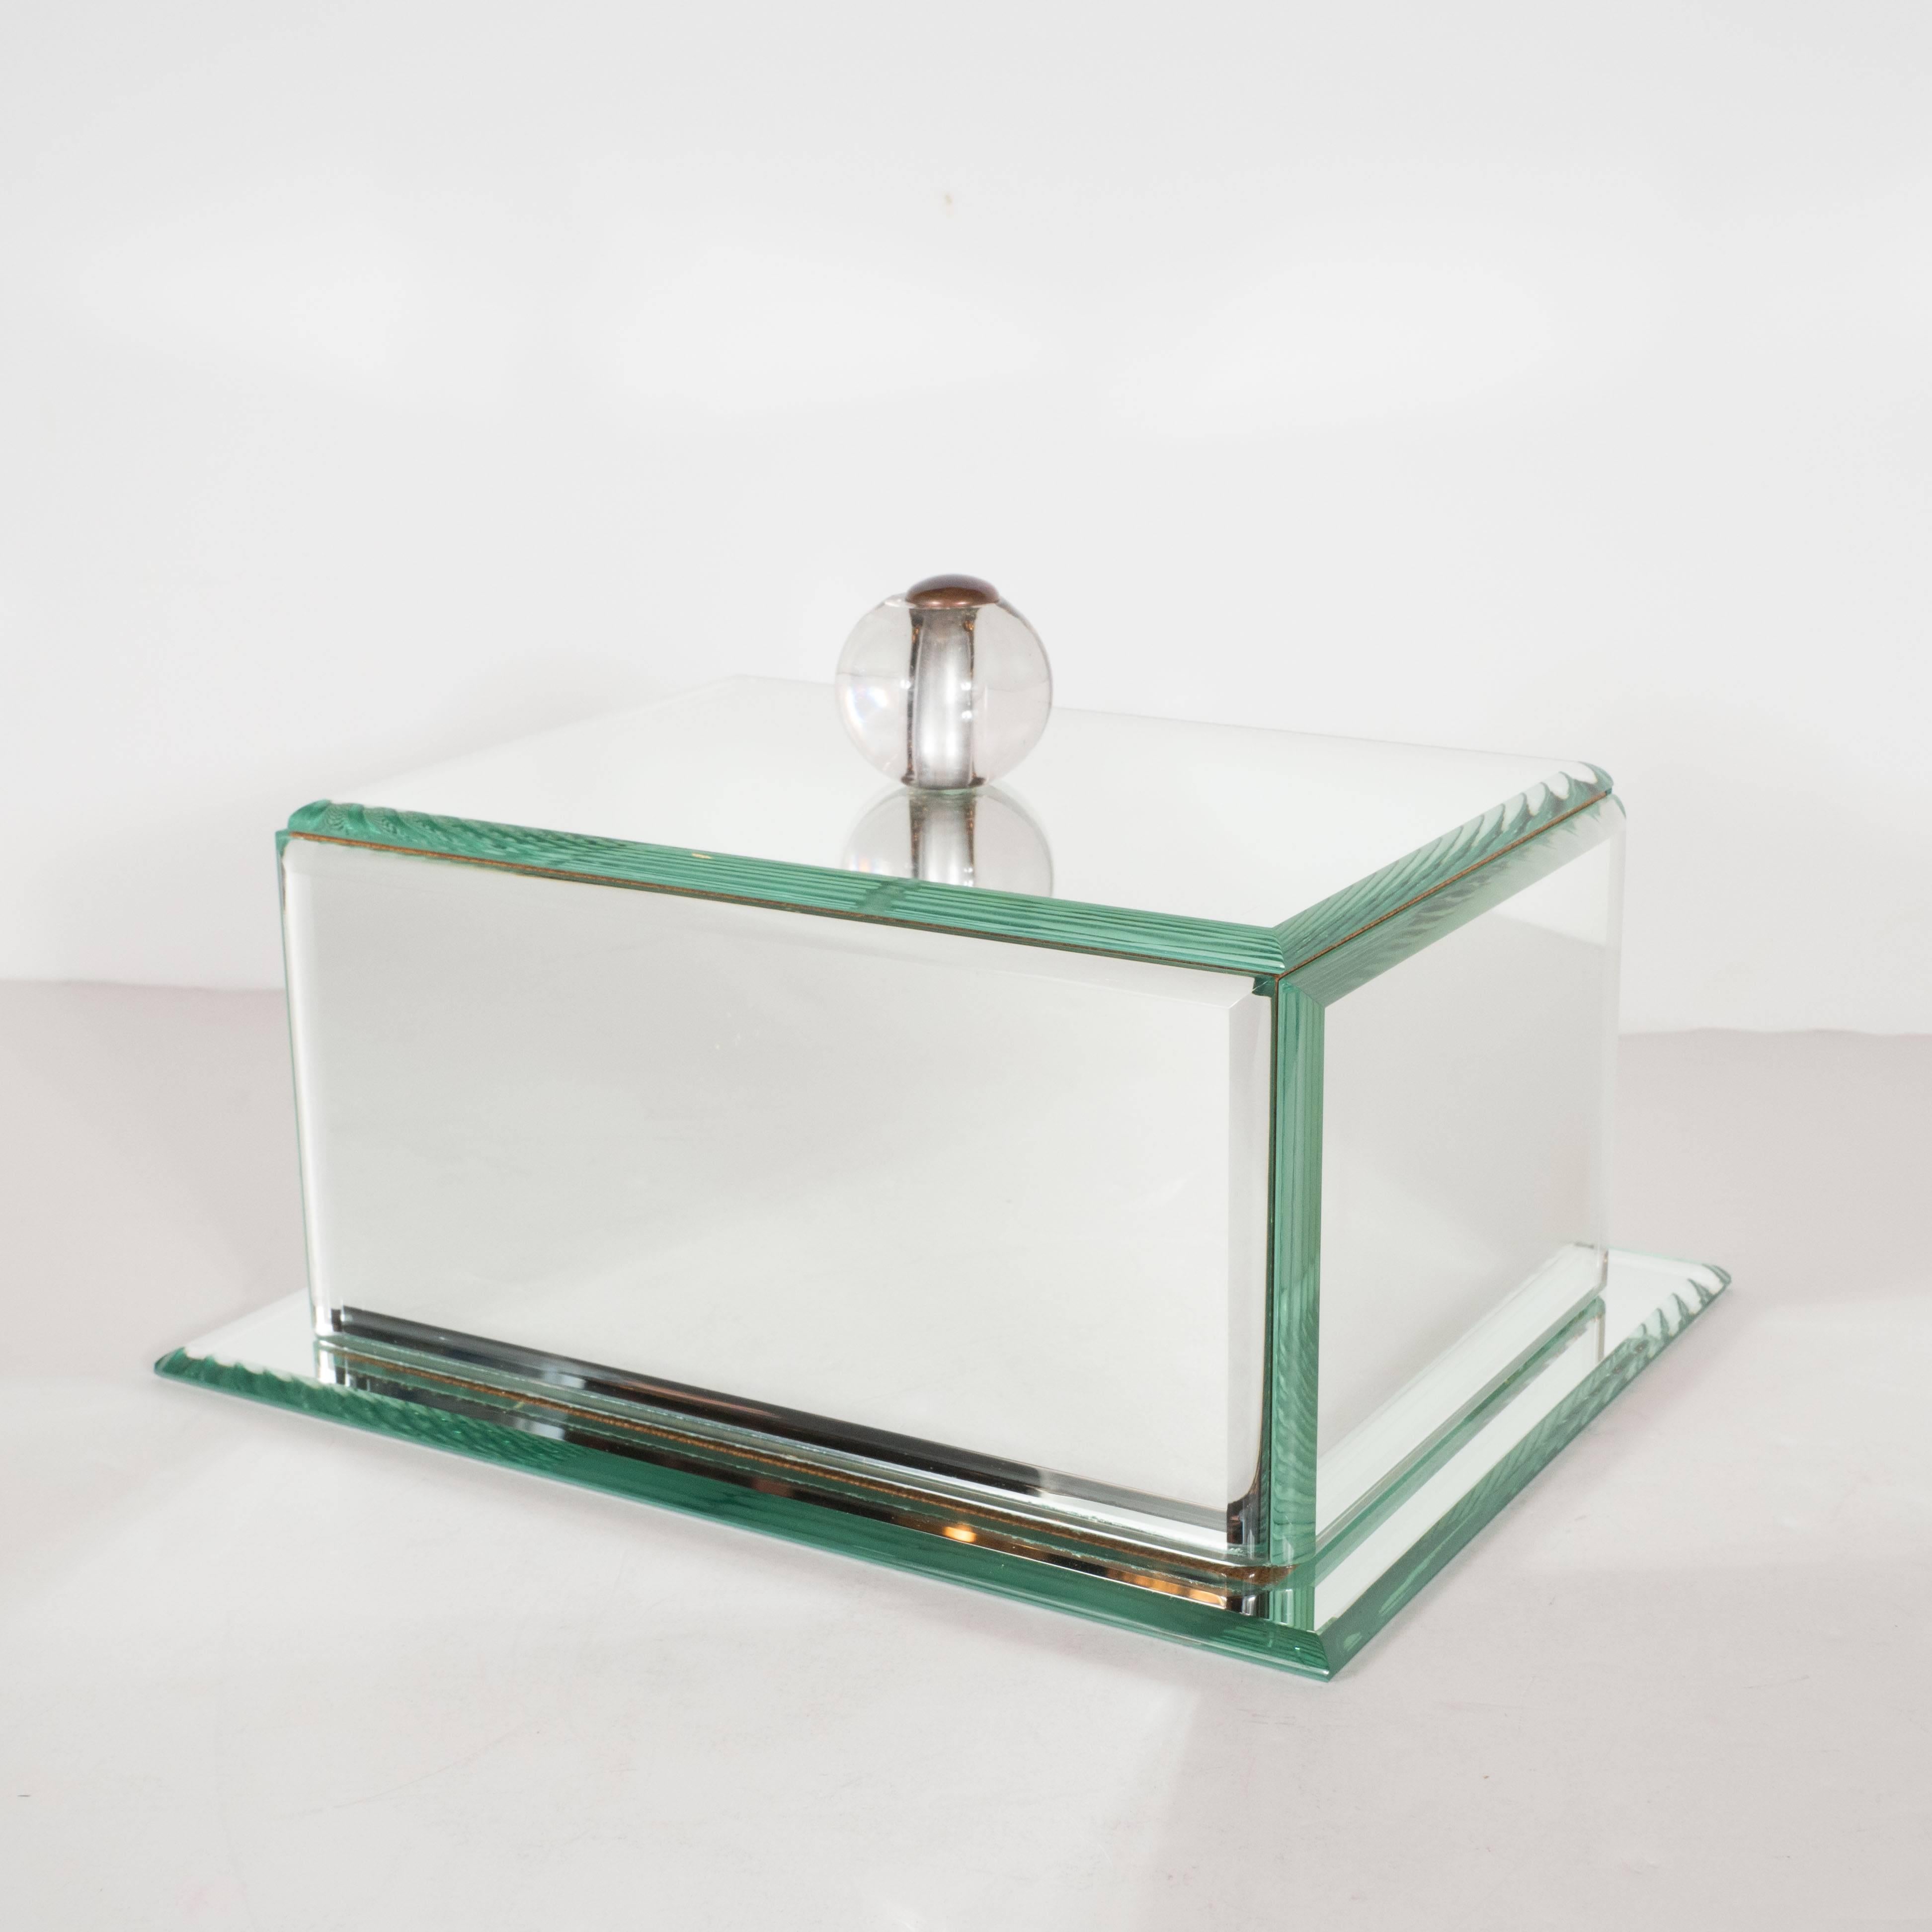 This refined Art Deco mirrored glass box features round beveled edges and a glass ball pull attached with a patined bronze rivet. The object includes a mirrored base that extends slightly beyond the perimeter of the box. The inside of the box has